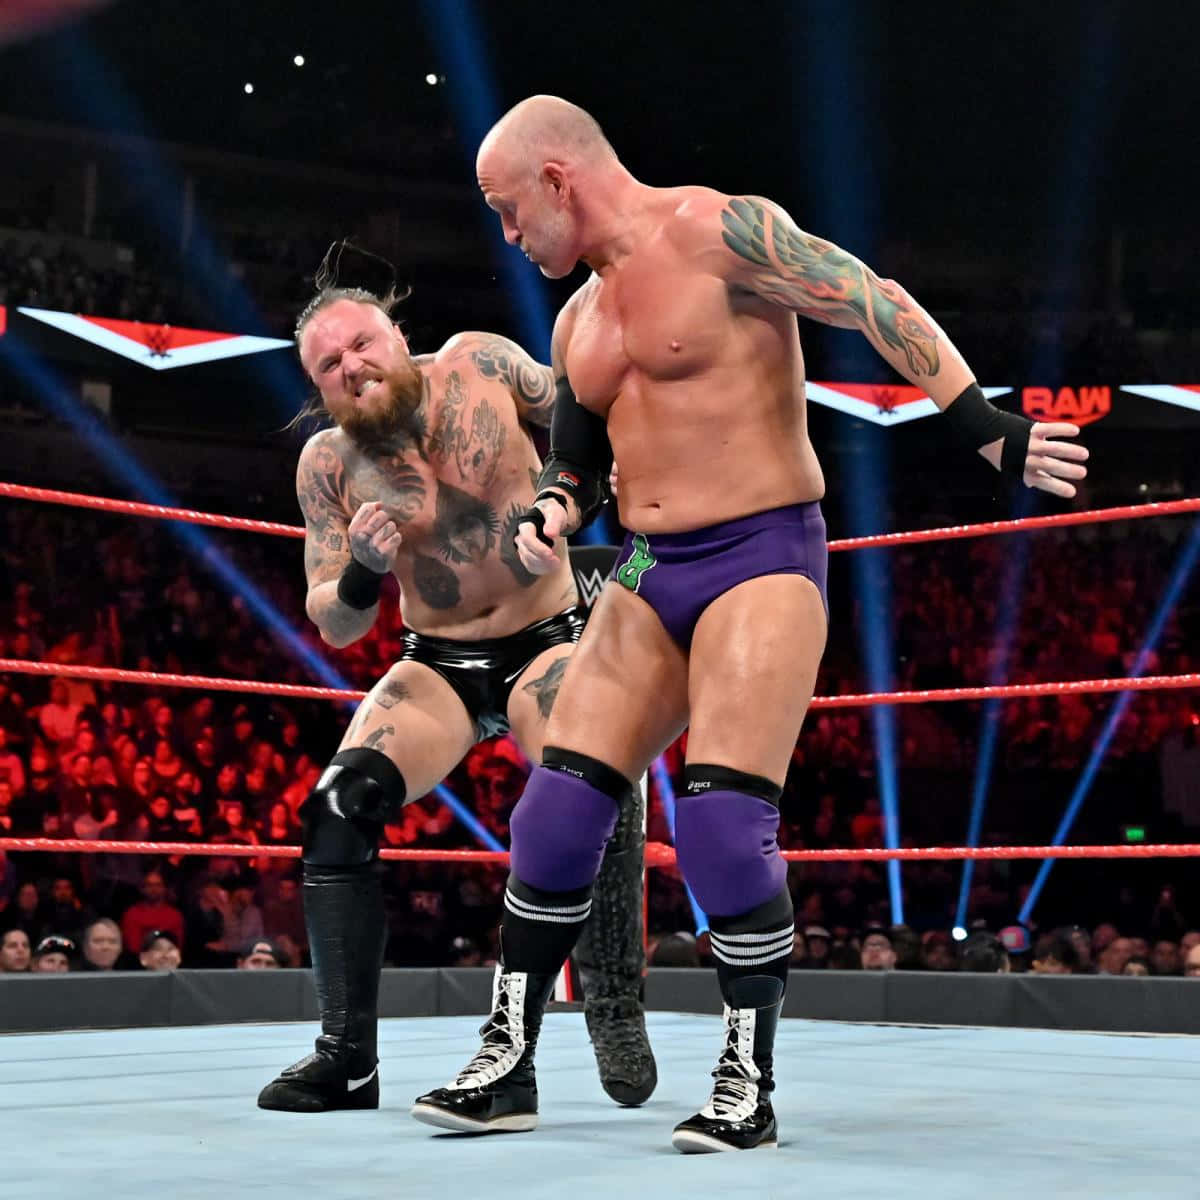 WWE Superstars Eric Young and Aleister Black Square Off in Raw Wallpaper